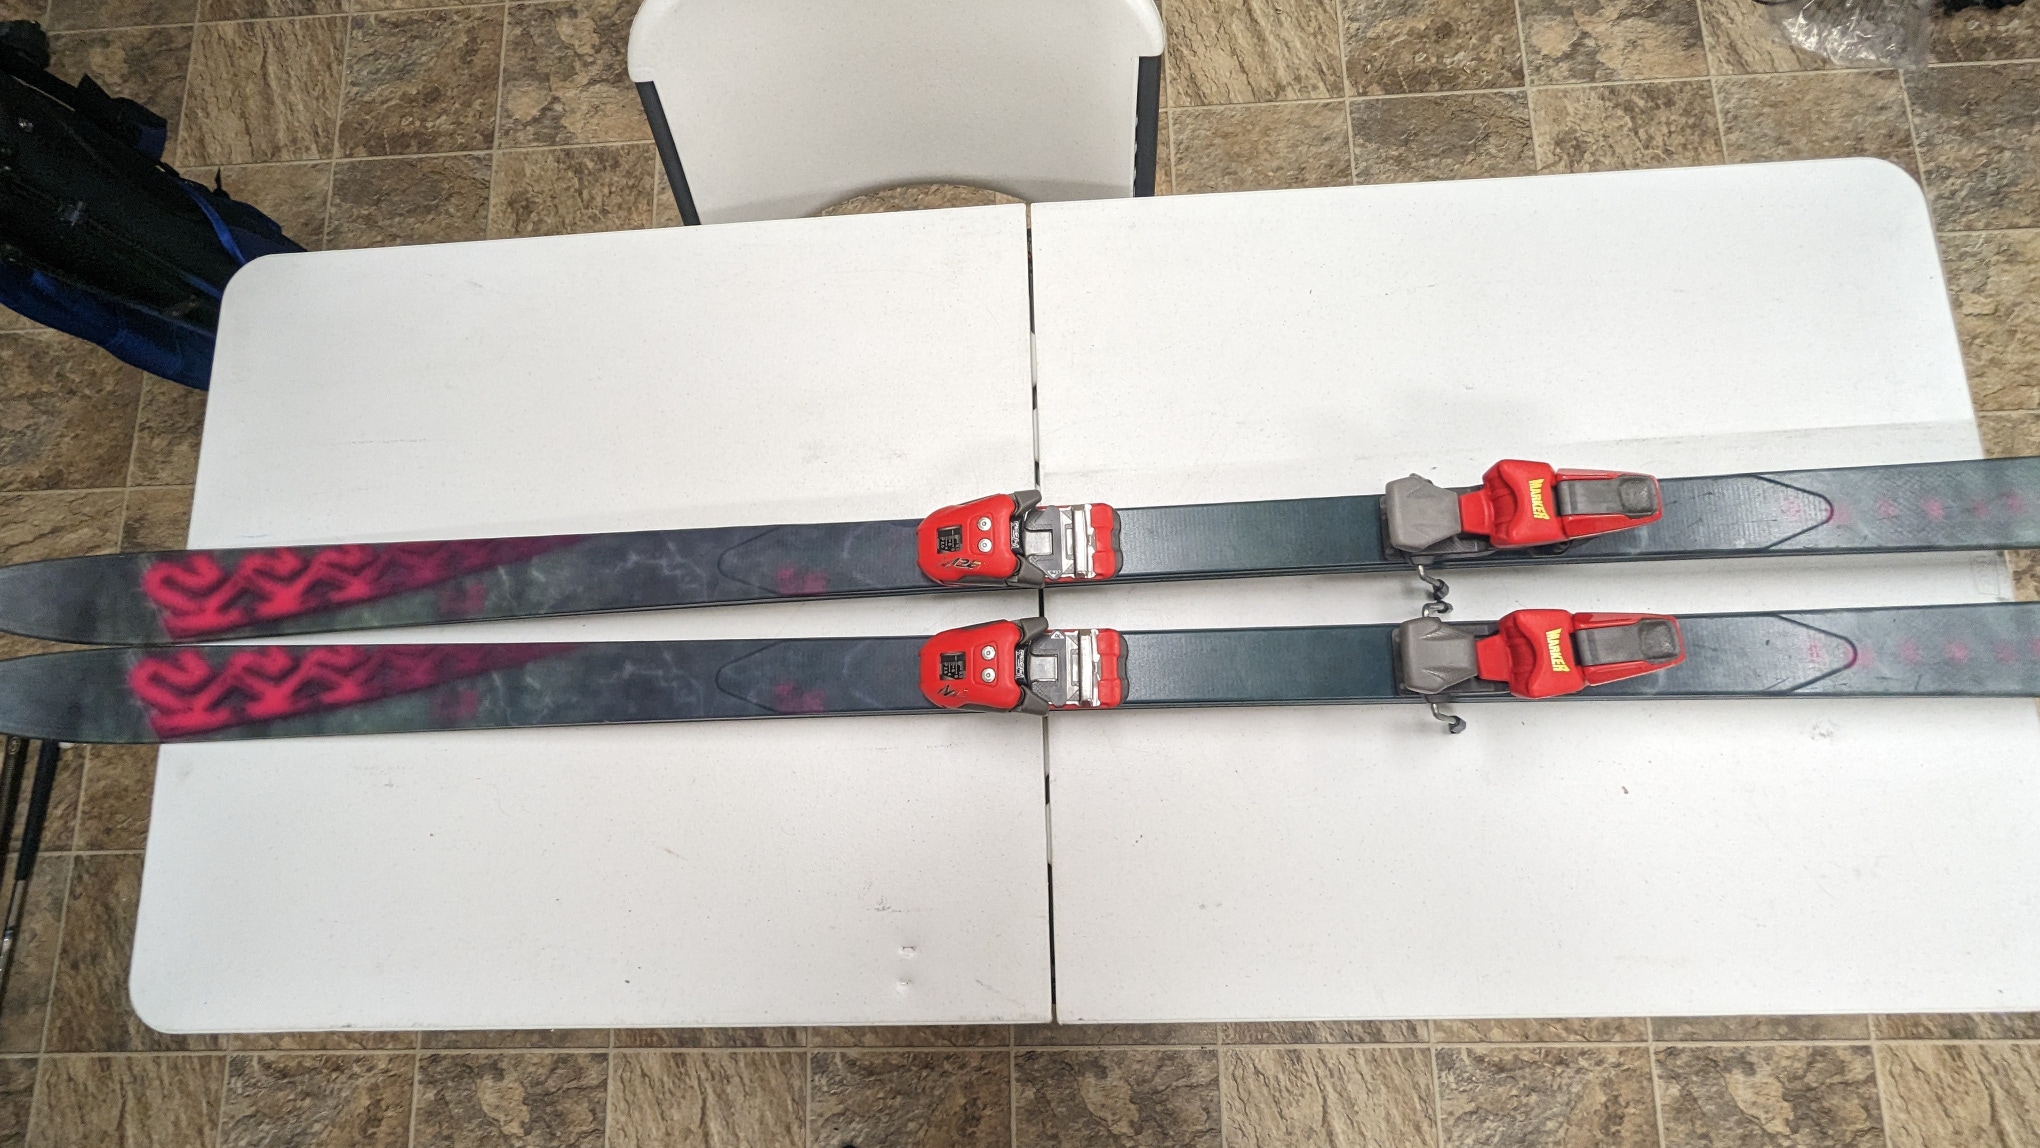 K2 Extreme FX Skis 190 cm with Marker M28 V-Tech Twincam Bindings